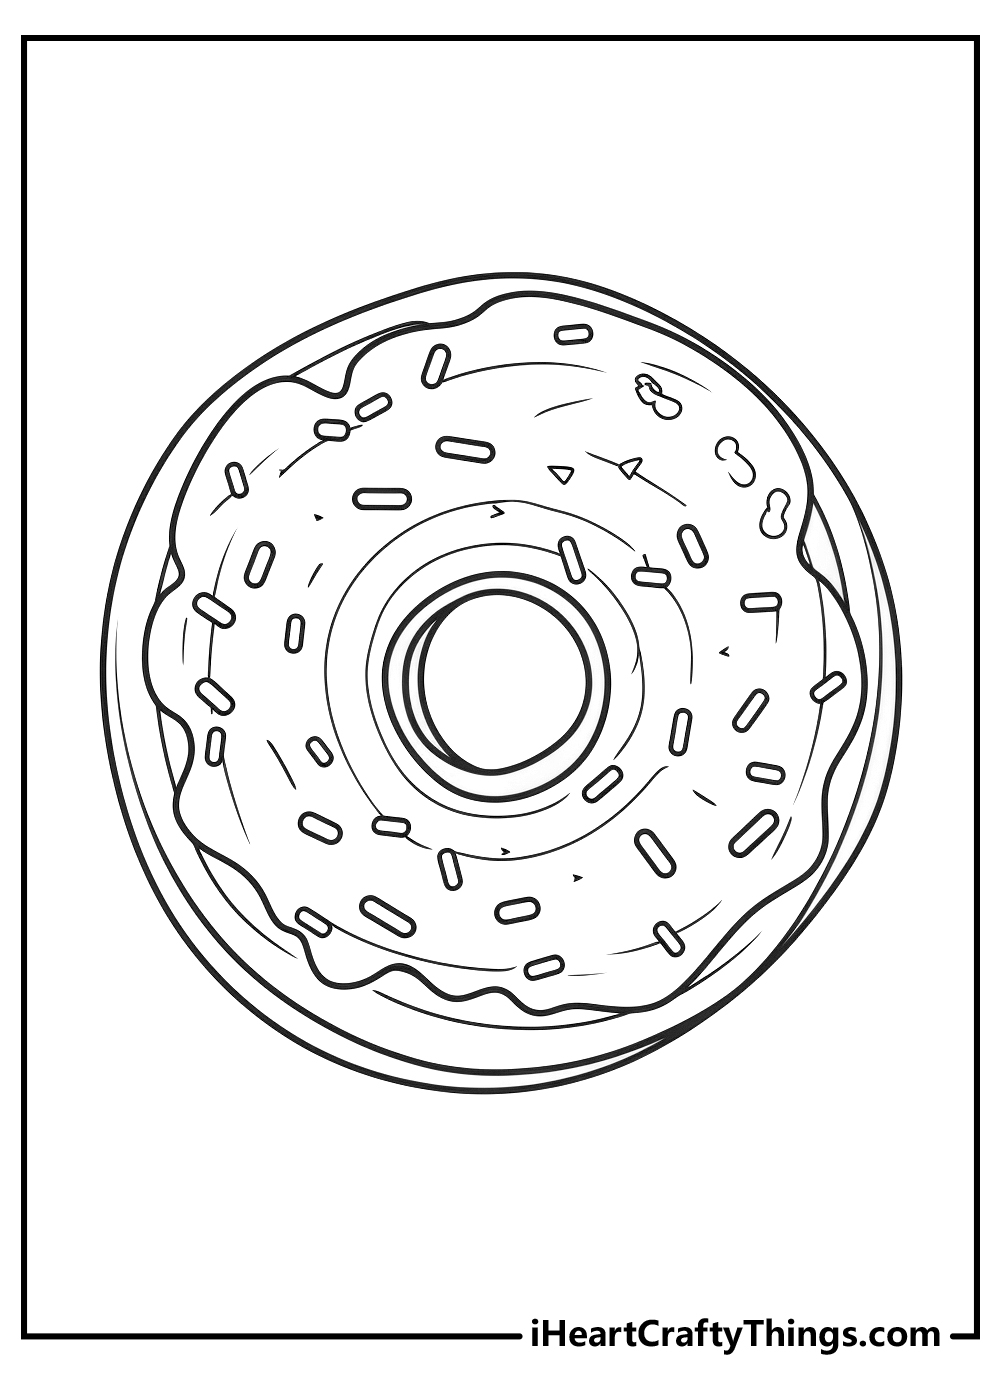 donut coloring sheet for kids